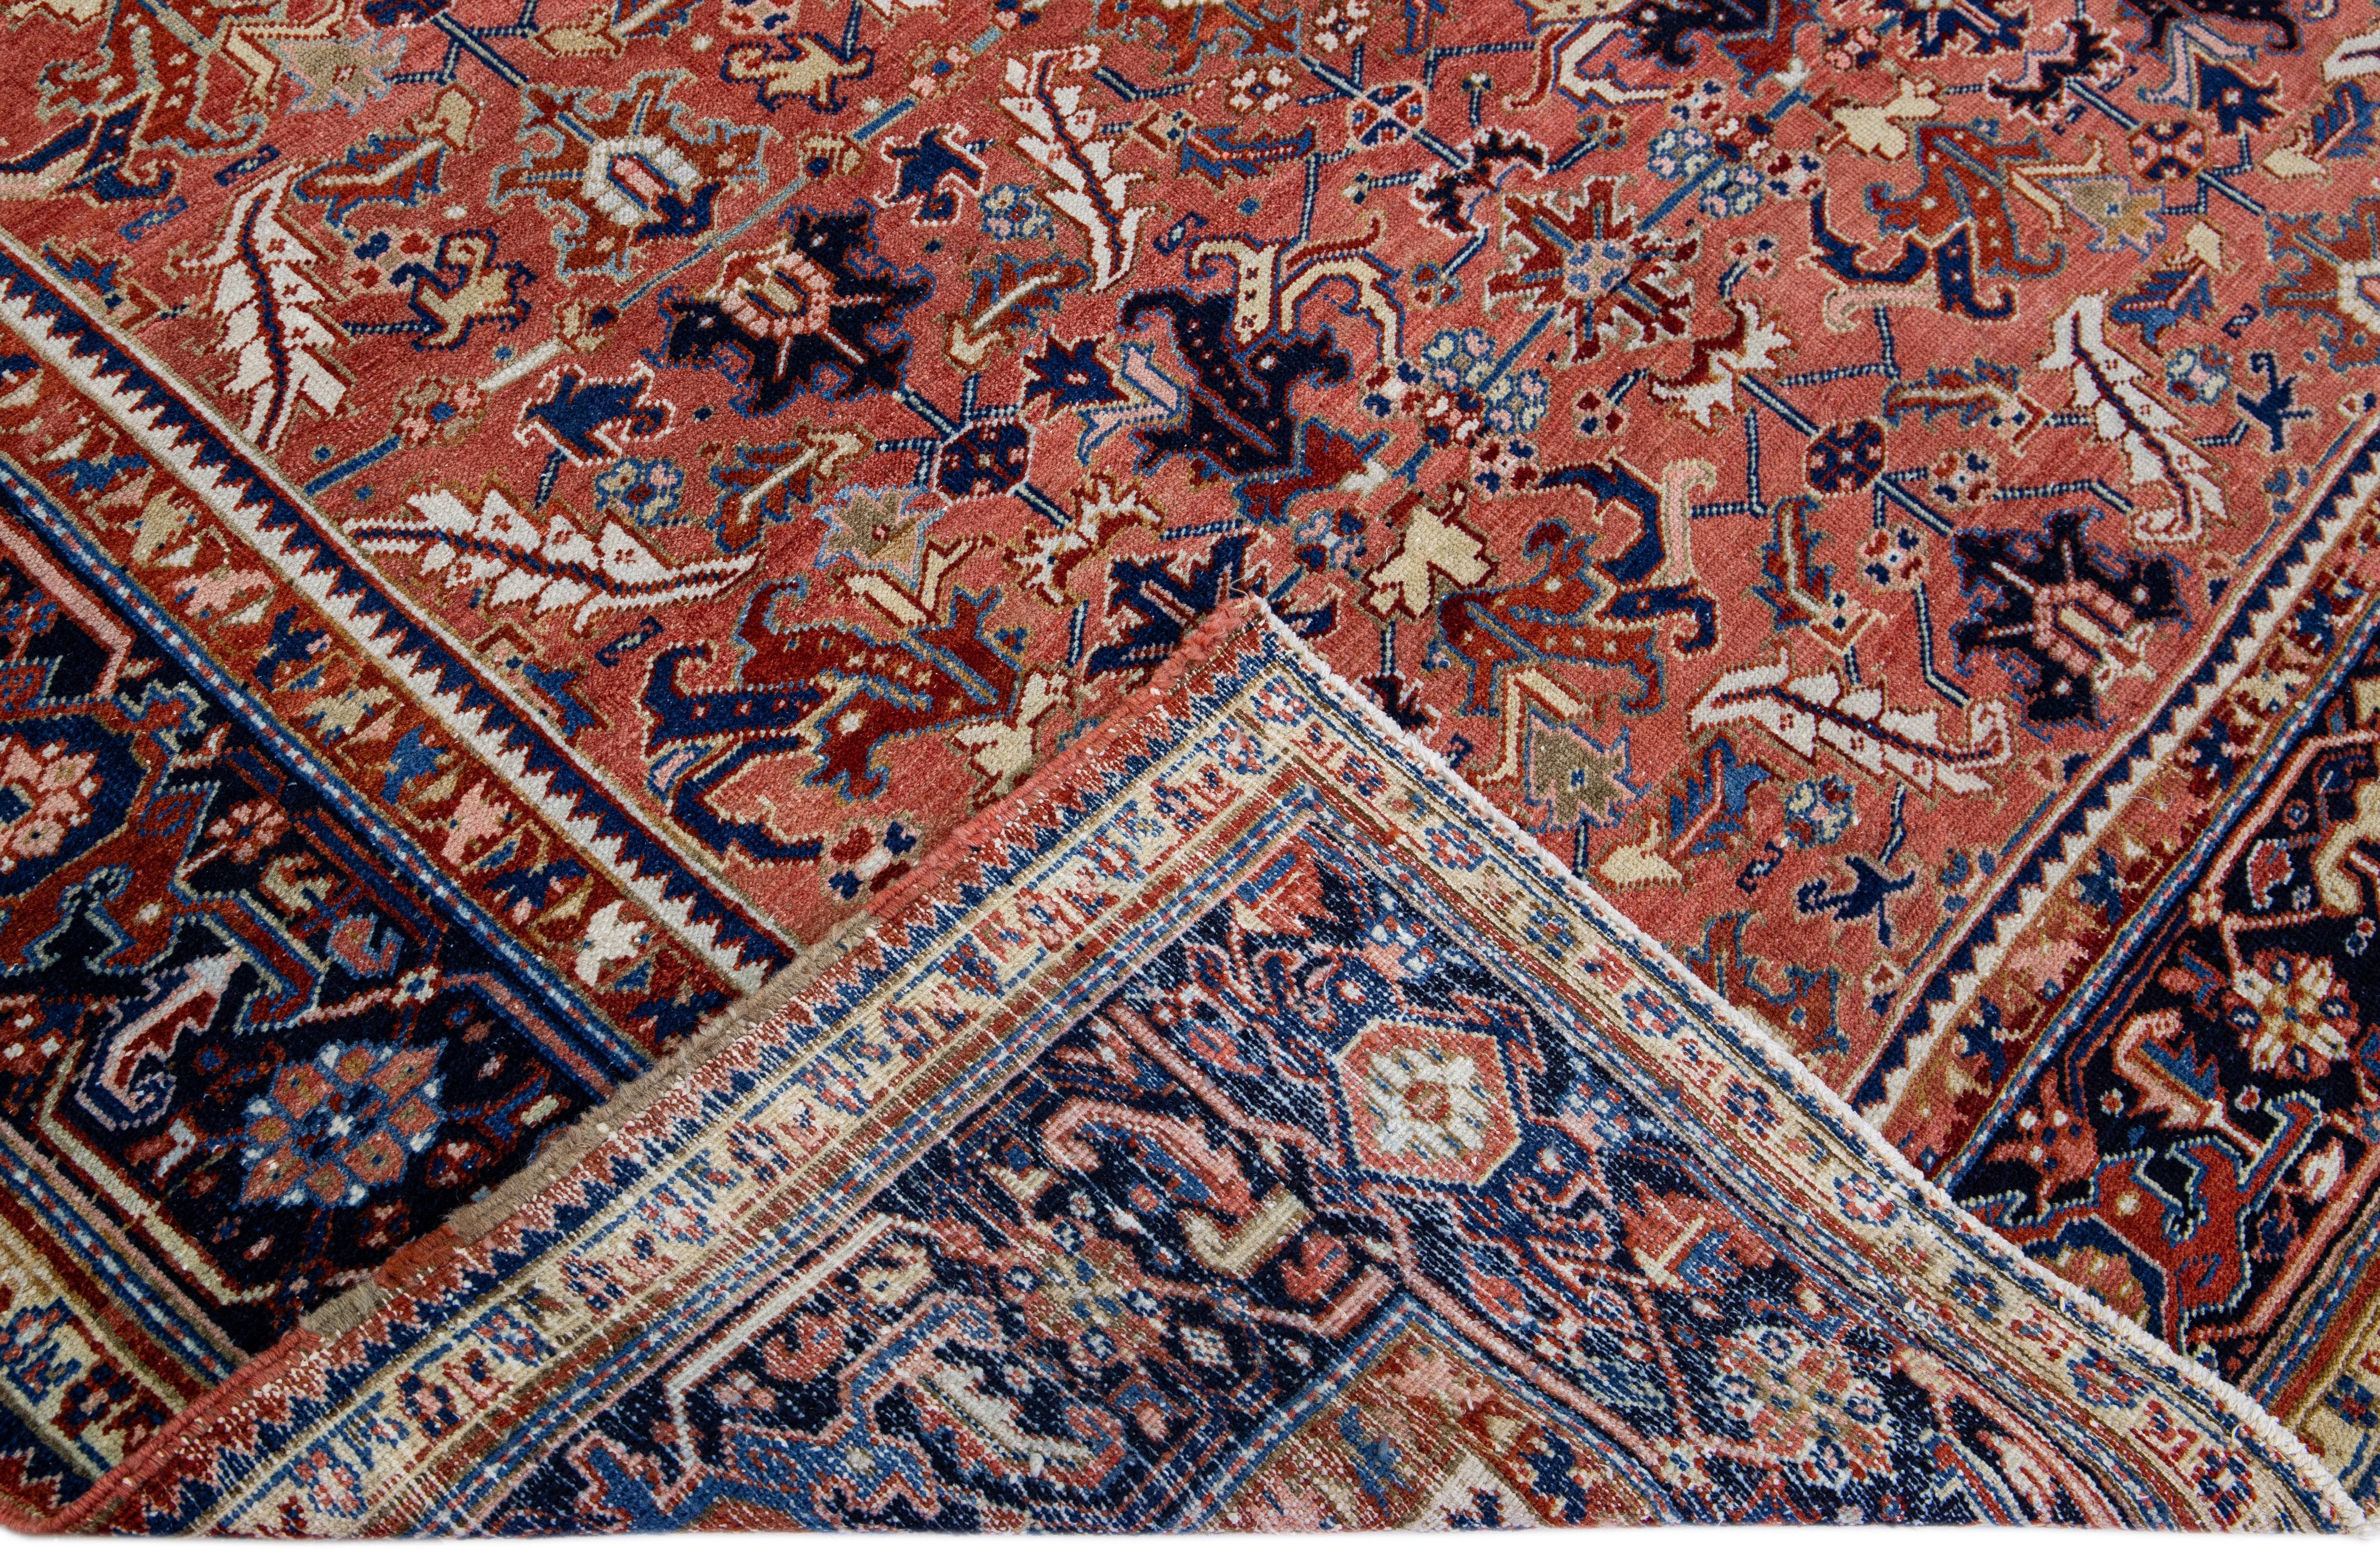 Beautiful antique Heriz Serapi hand-knotted wool rug with an orange-rust field. This Heriz rug has a navy-blue designed frame and multi-color accents that features a gorgeous all-over geometric floral design.

This rug measures: 7'10